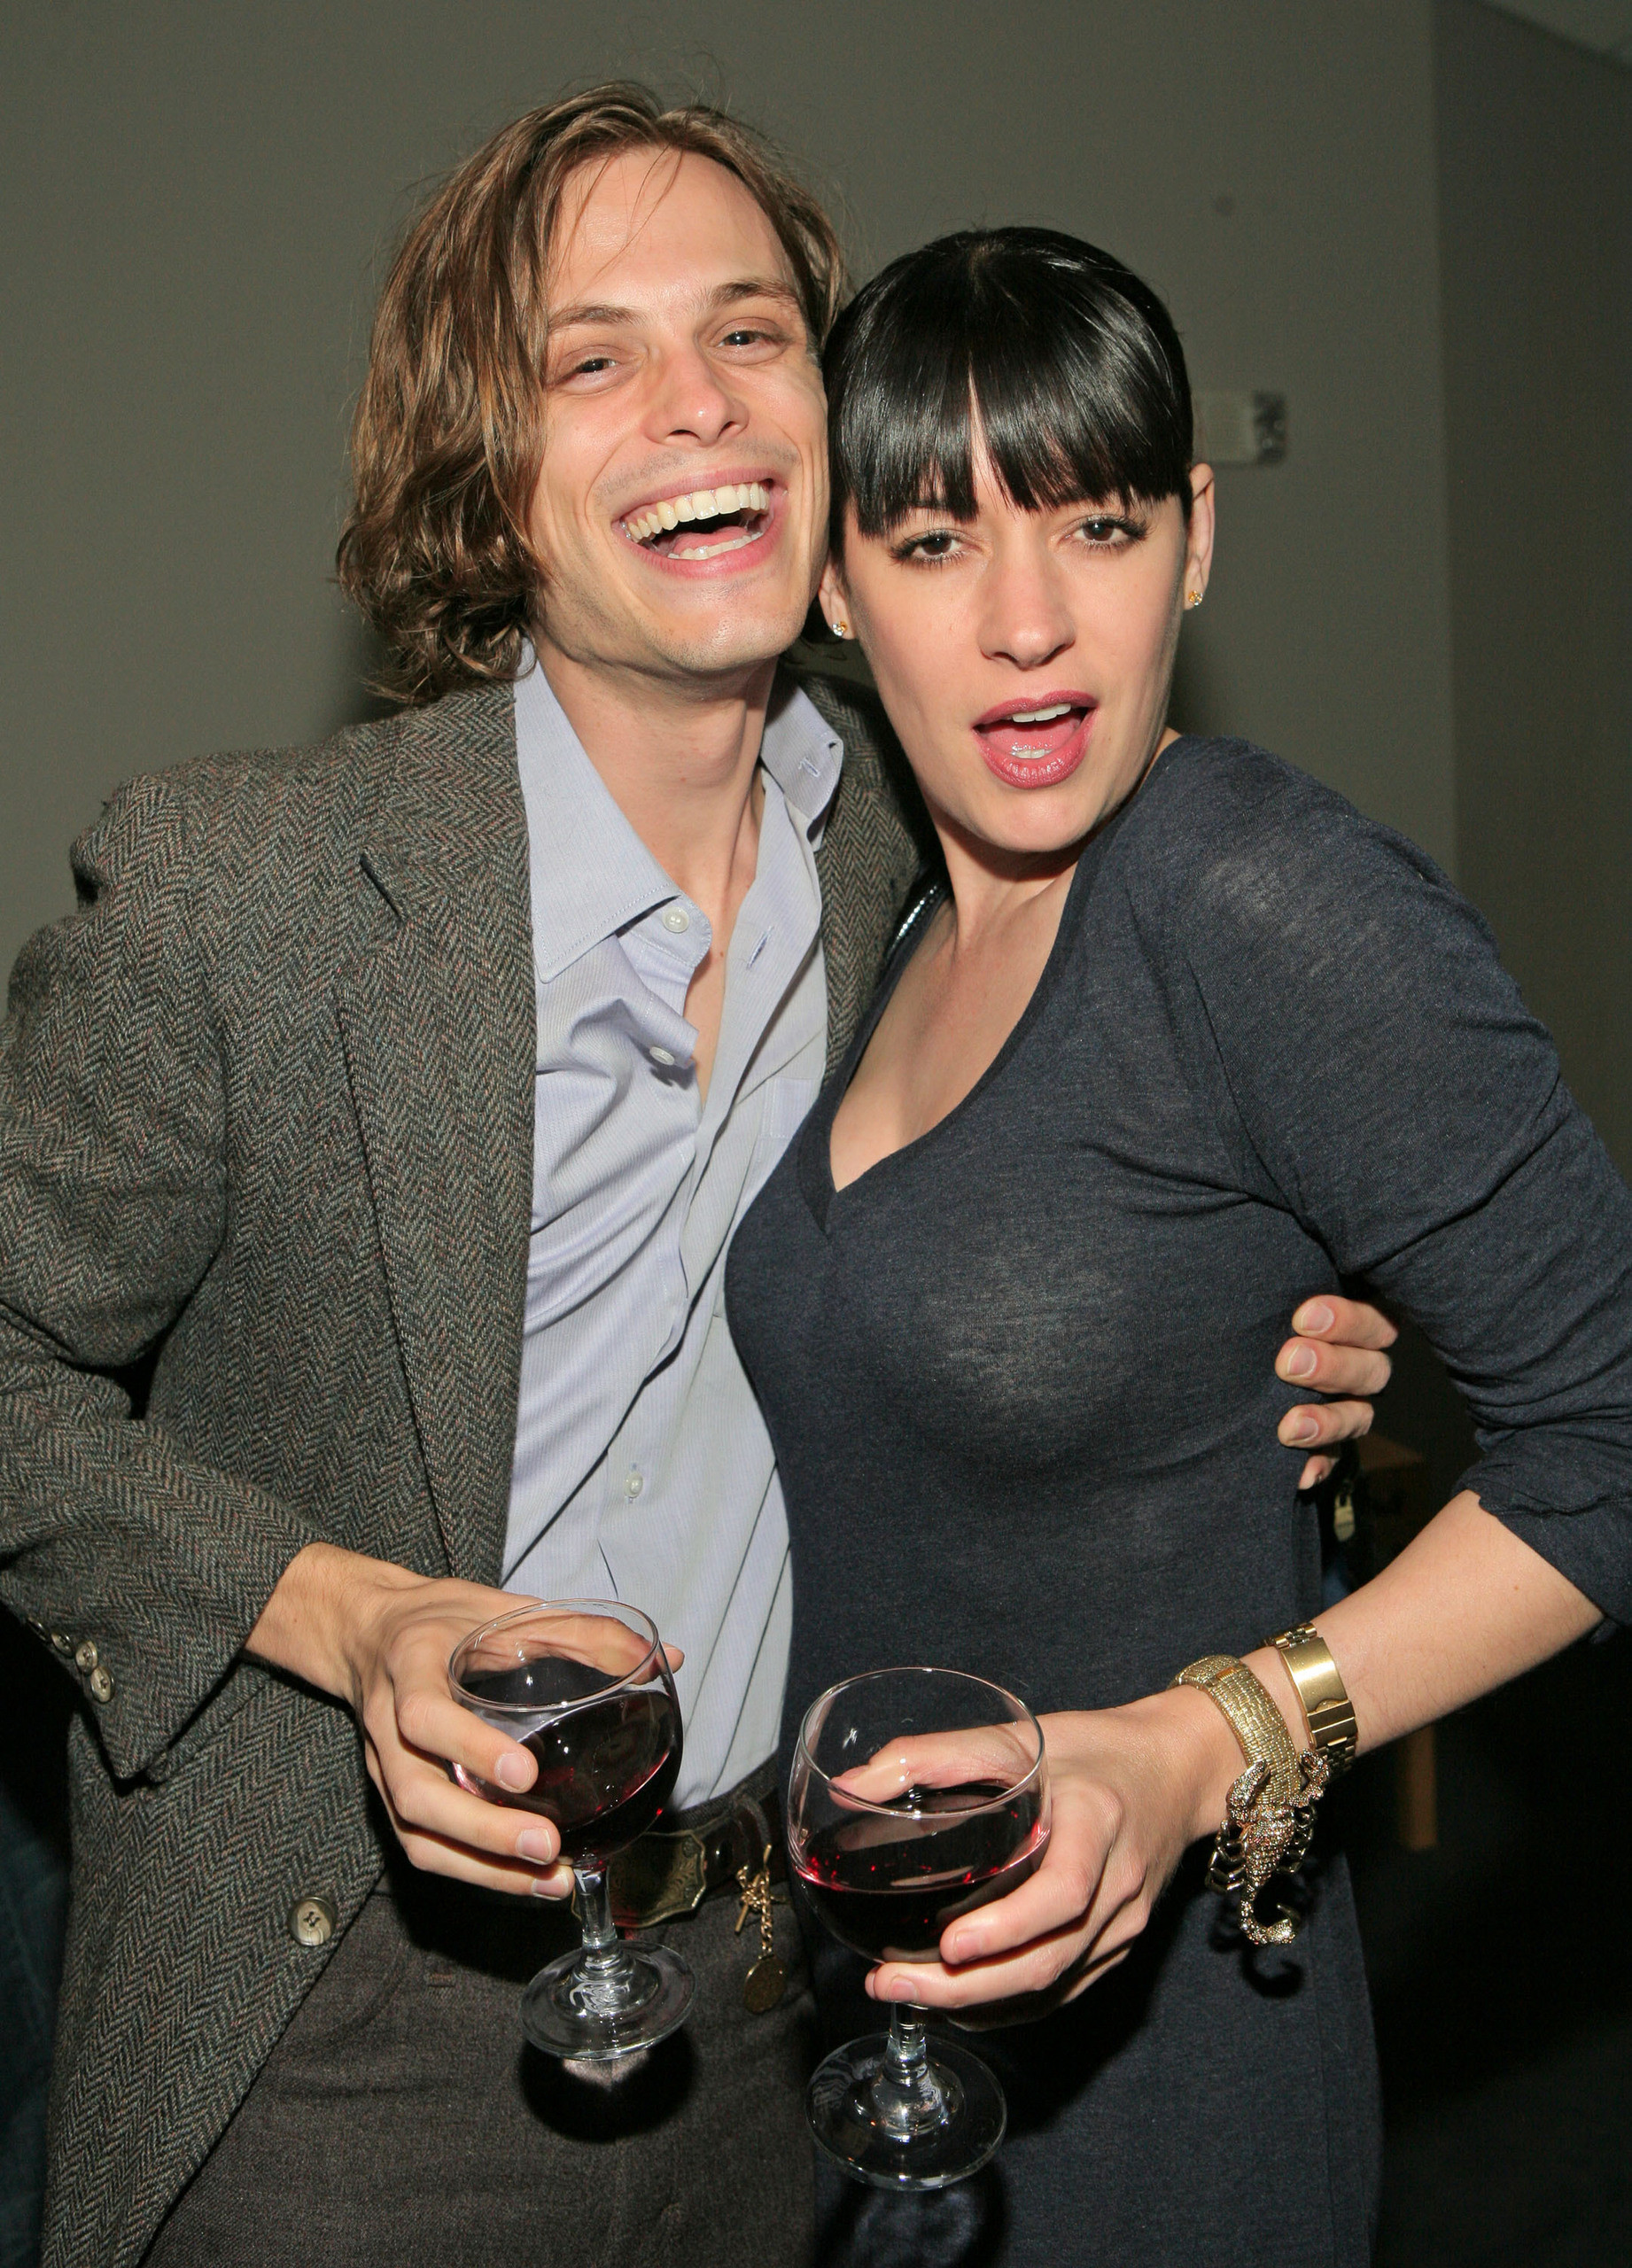 1842x2560 Reid and Morgan images Matthew-Gray-Gubler-Paget-Brewster HD wallpaper and  background photos